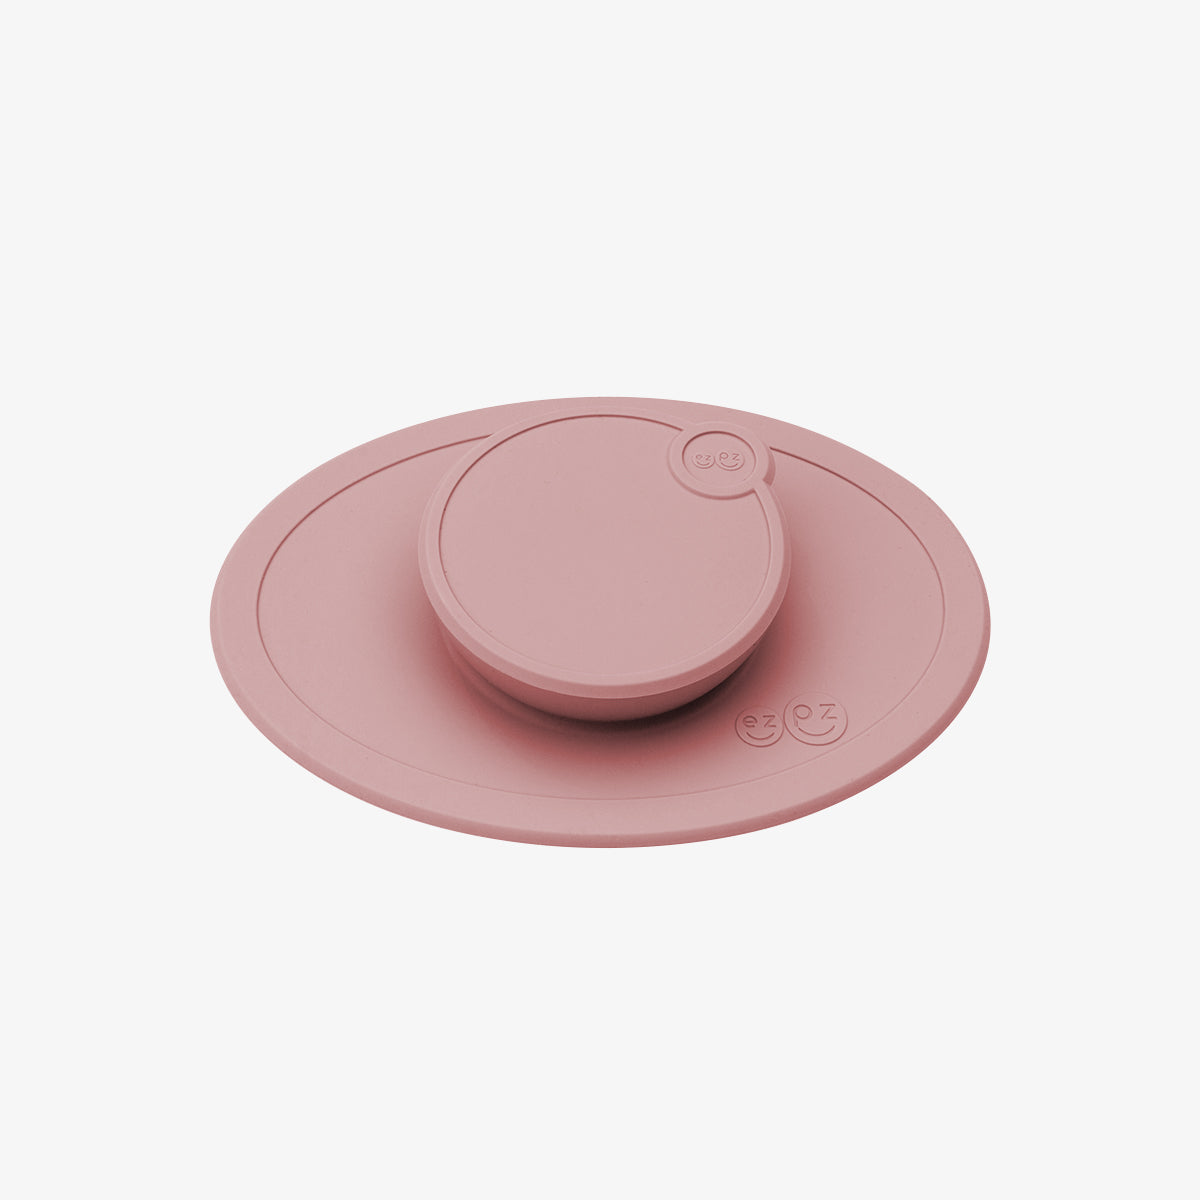 Tiny Bowl Lid in Blush / Storage Lids for the Tiny Bowl by ezpz / Silicone Lid for Baby Bowl